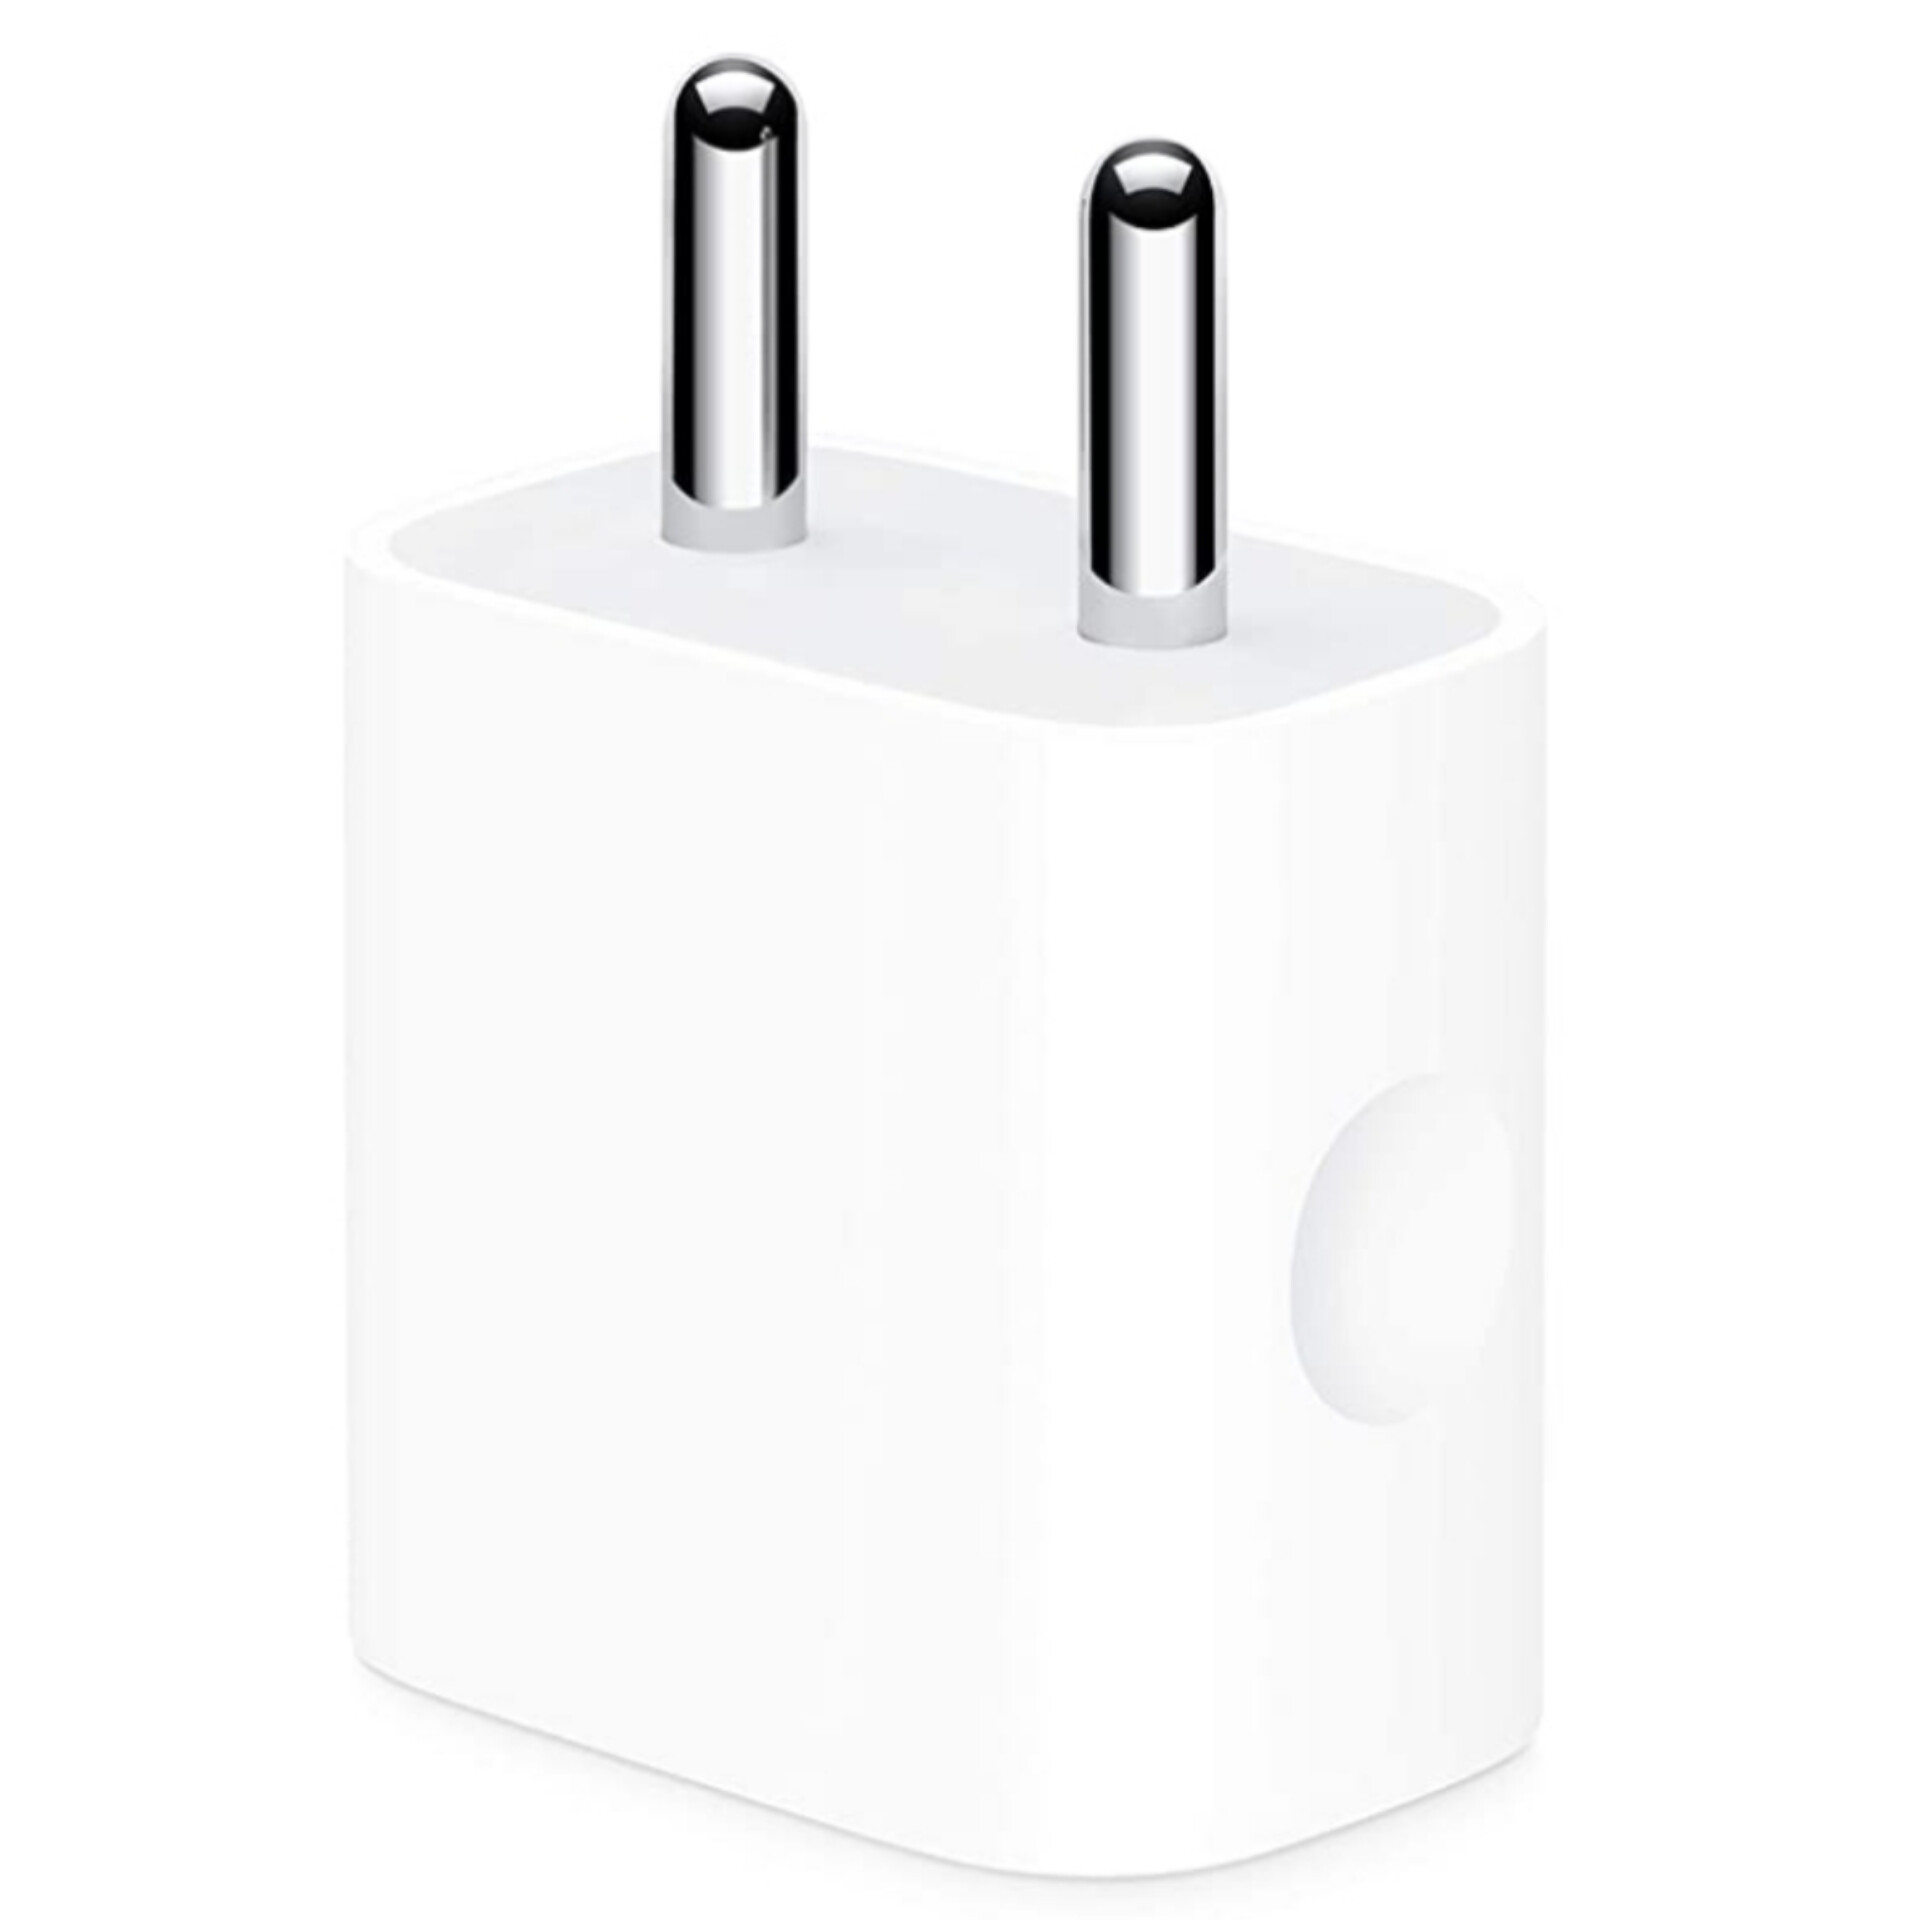 Exchange: & iPad Benefits USB-C AirPods) iPhone, Recycle (for – Power with Apple 20W Adapter